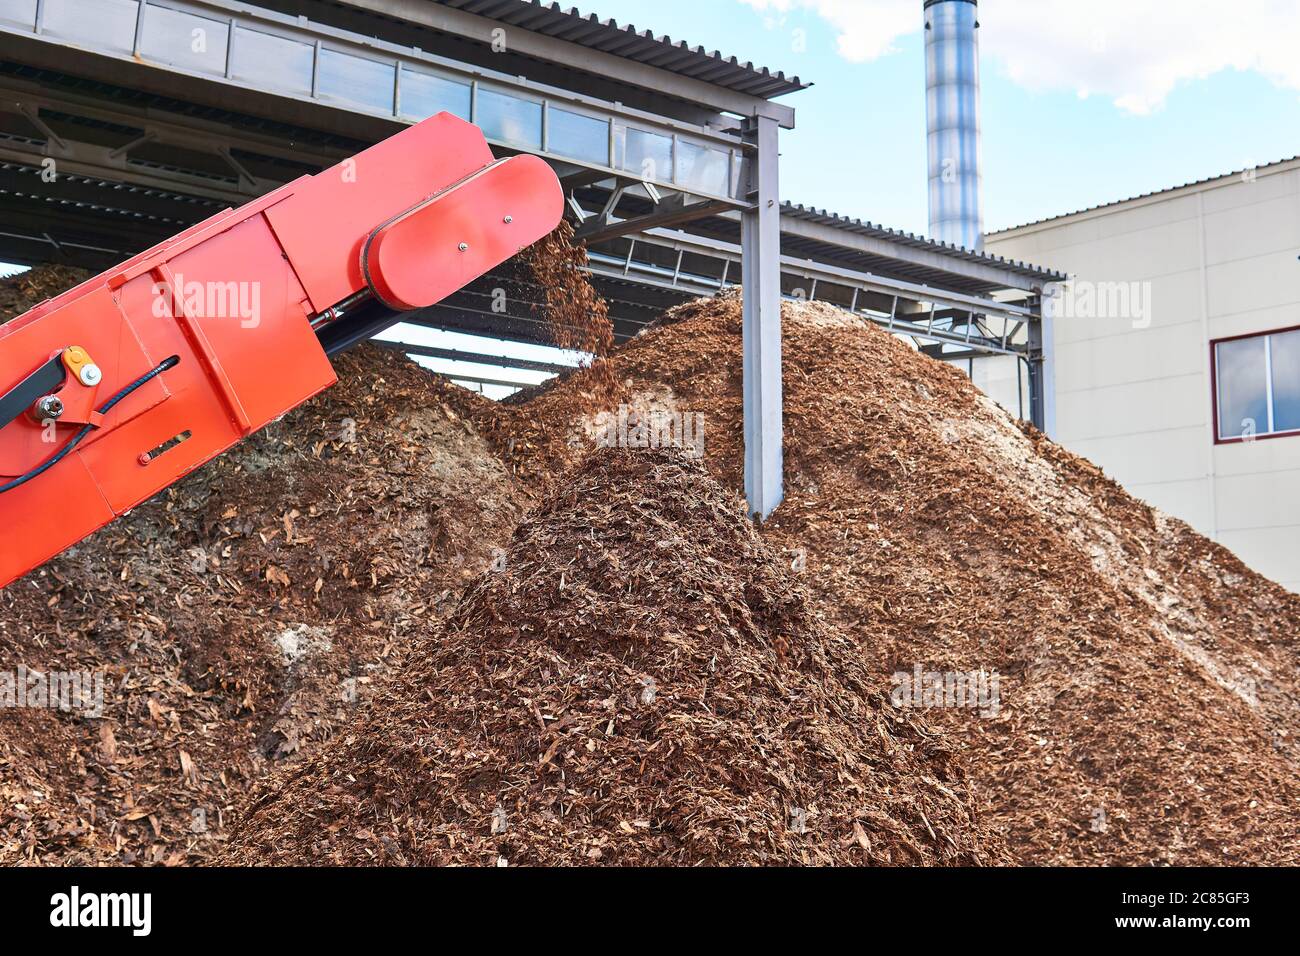 close-up conveyor of an industrial wood shredder producing wood chips from bark Stock Photo